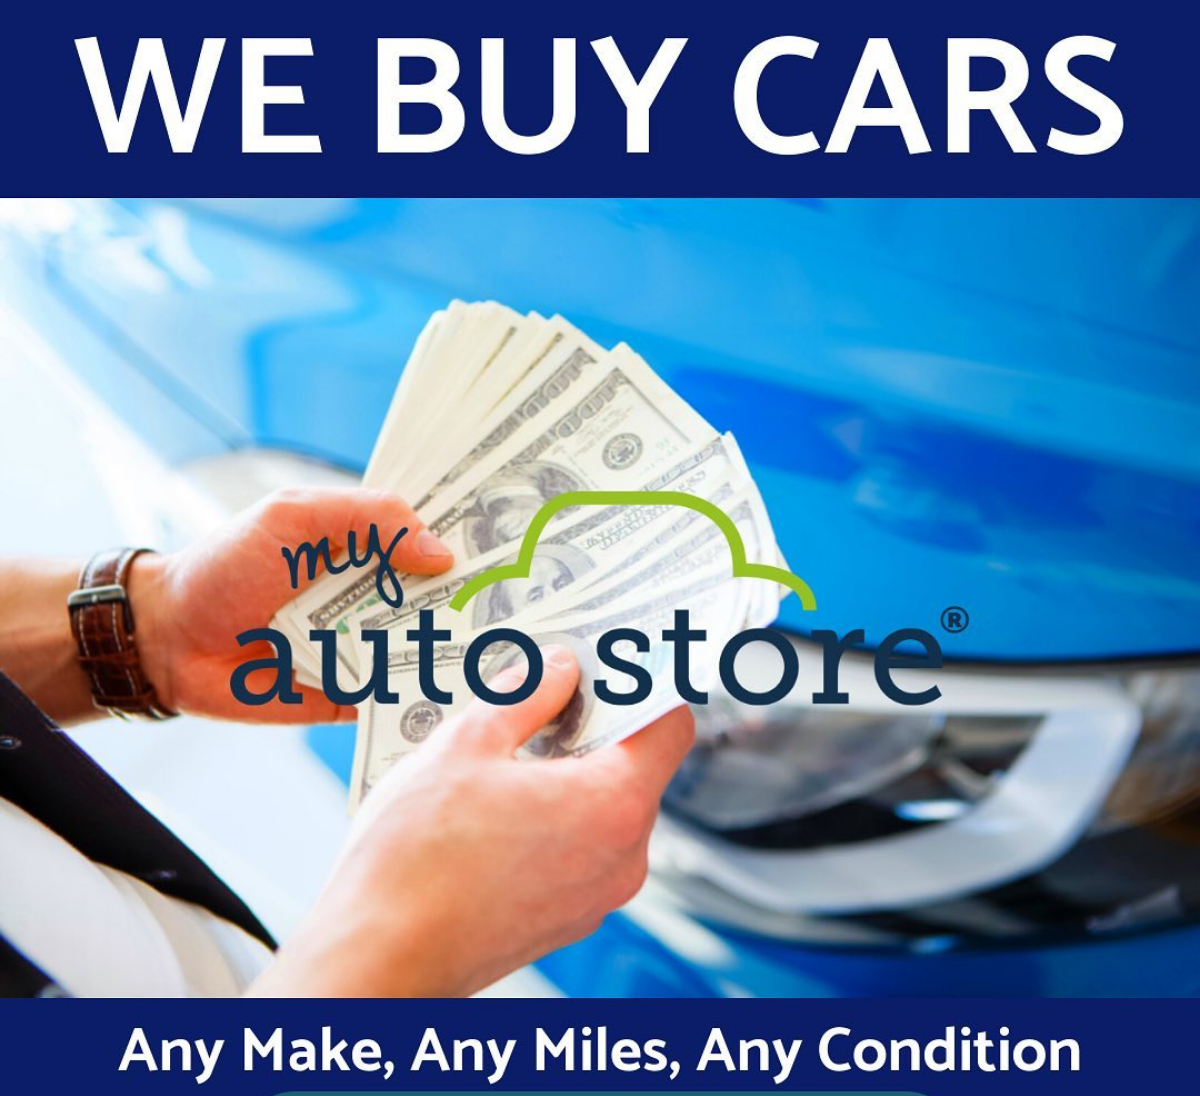 We Buy Cars banner -any make, any miles, any condition